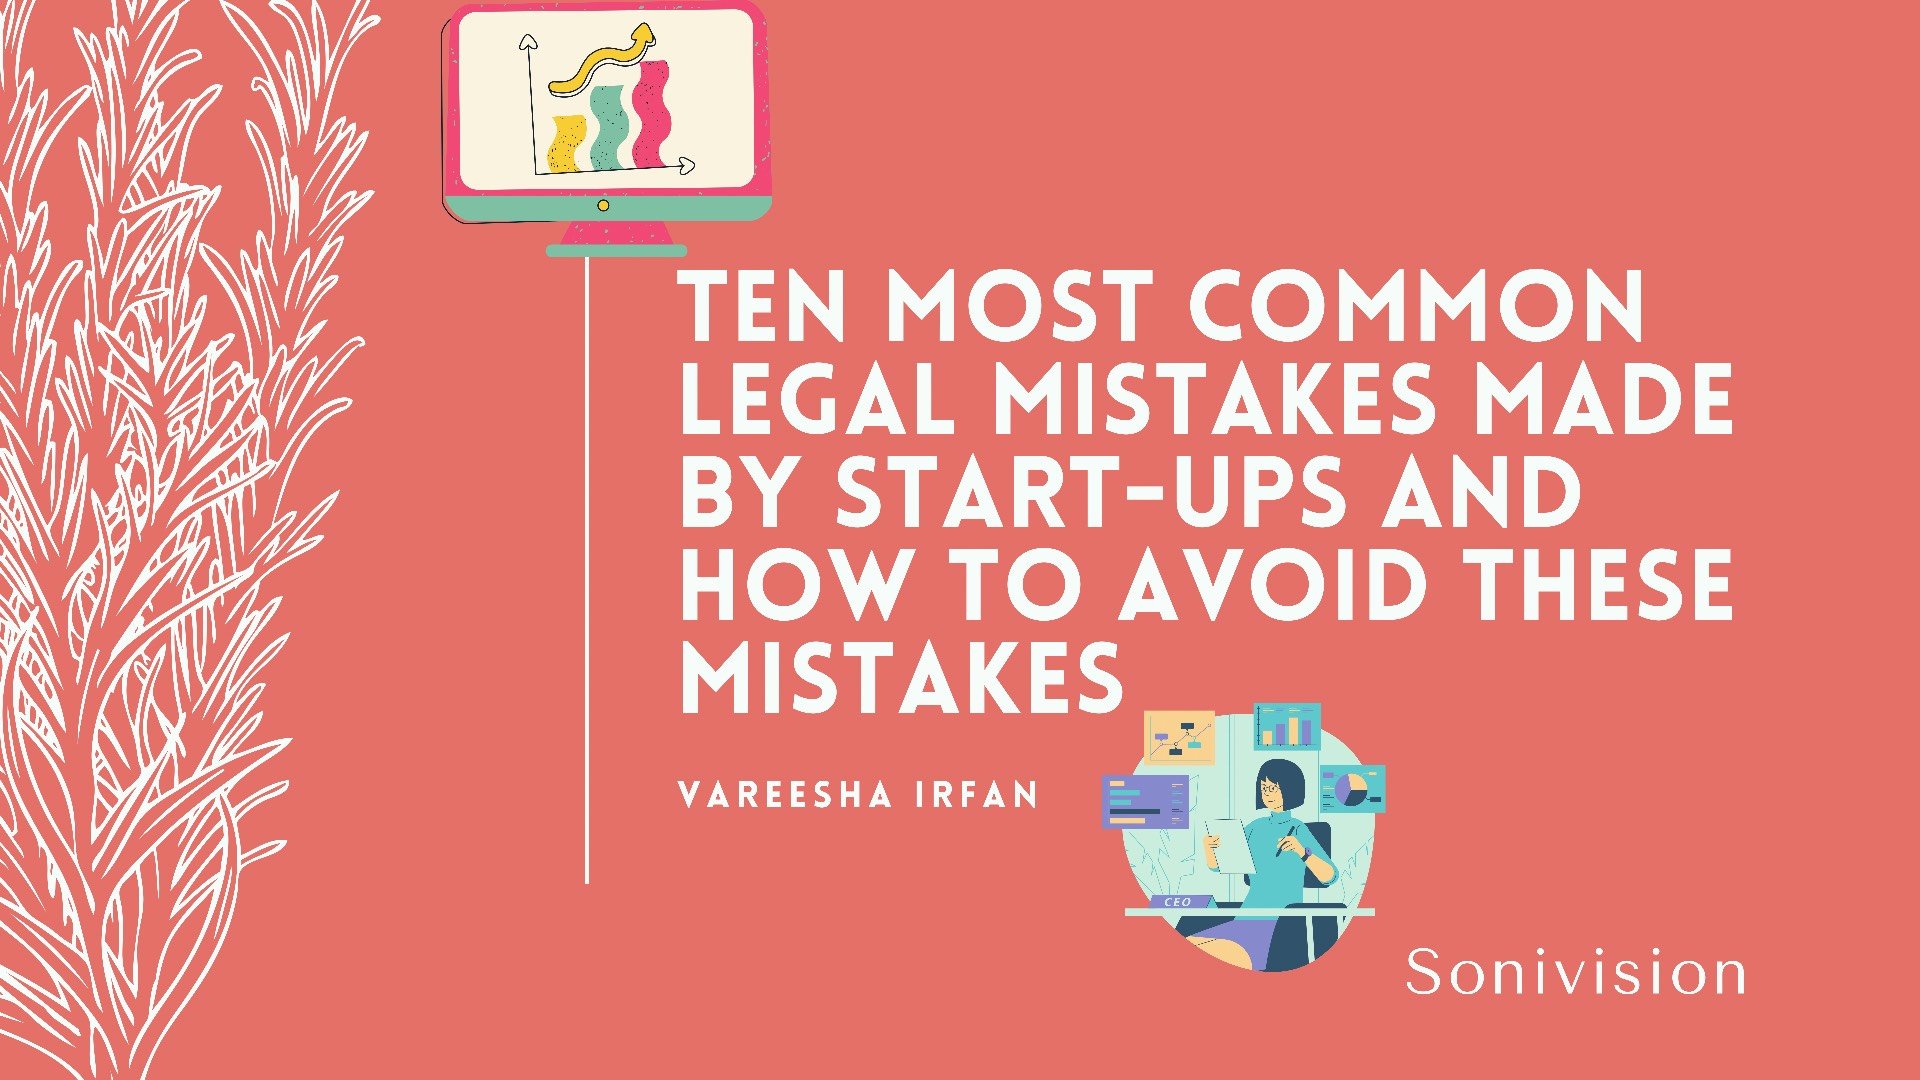 TEN MOST COMMON LEGAL MISTAKES MADE BY START-UPS AND HOW TO AVOID THESE MISTAKES